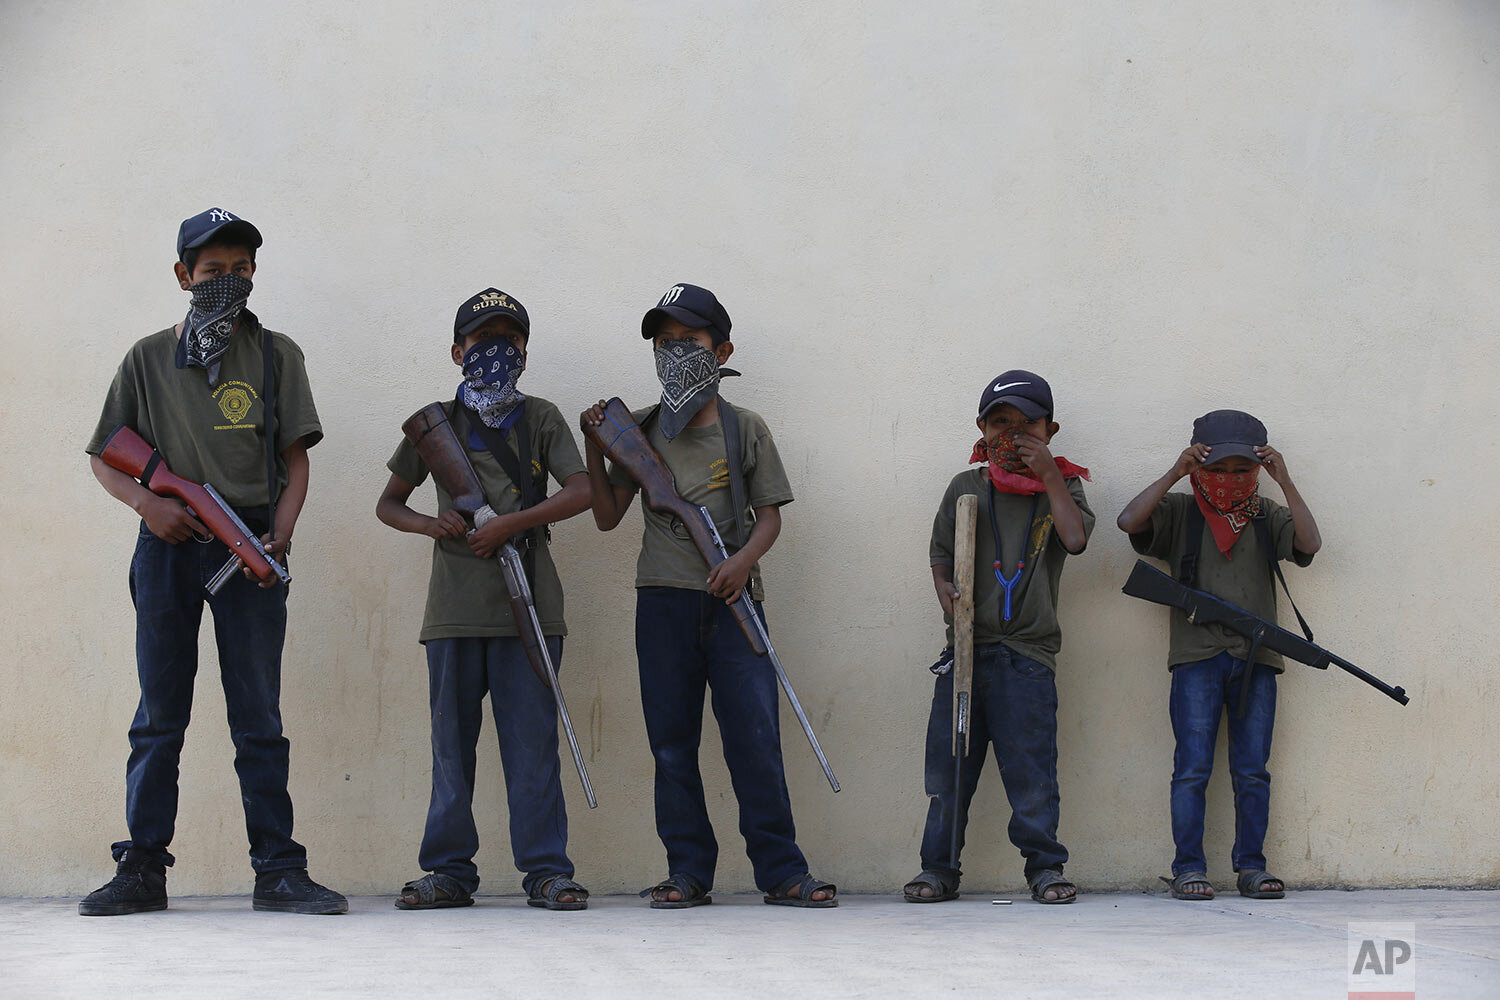  Children hold training weapons, some real and some fake, during a display for the media designed to attract the federal government's attention to the dangers of organized crime that their town negotiates daily in Ayahualtempa, Guerrero state, Mexico